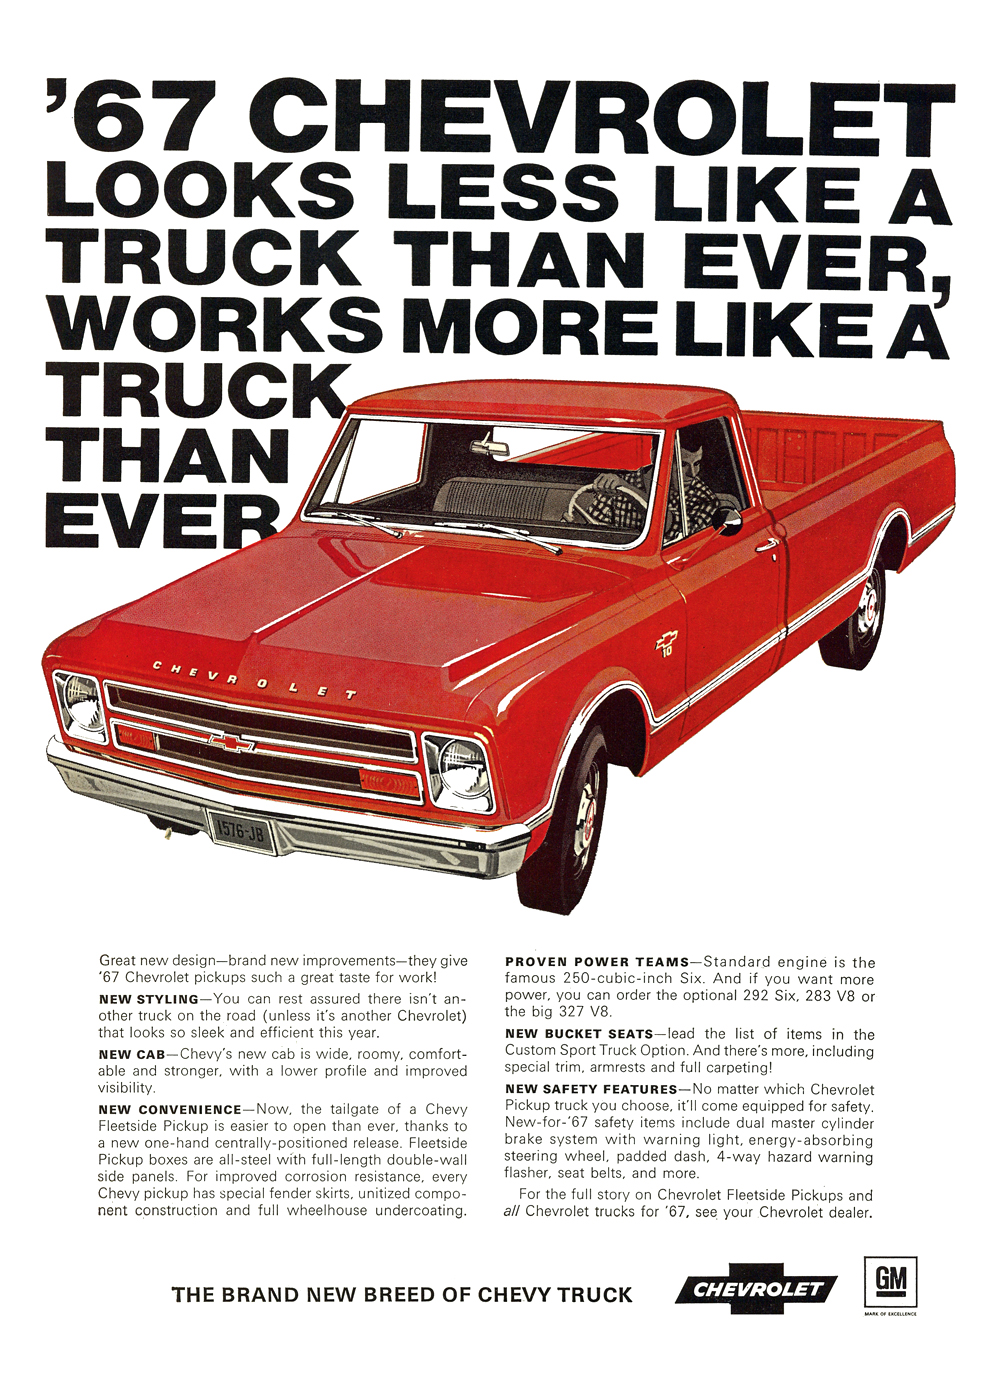 Chevrolet Fleetside Pickup Ad (1967): '67 Chevrolet looks less like a truck than ever, works more like a than ever